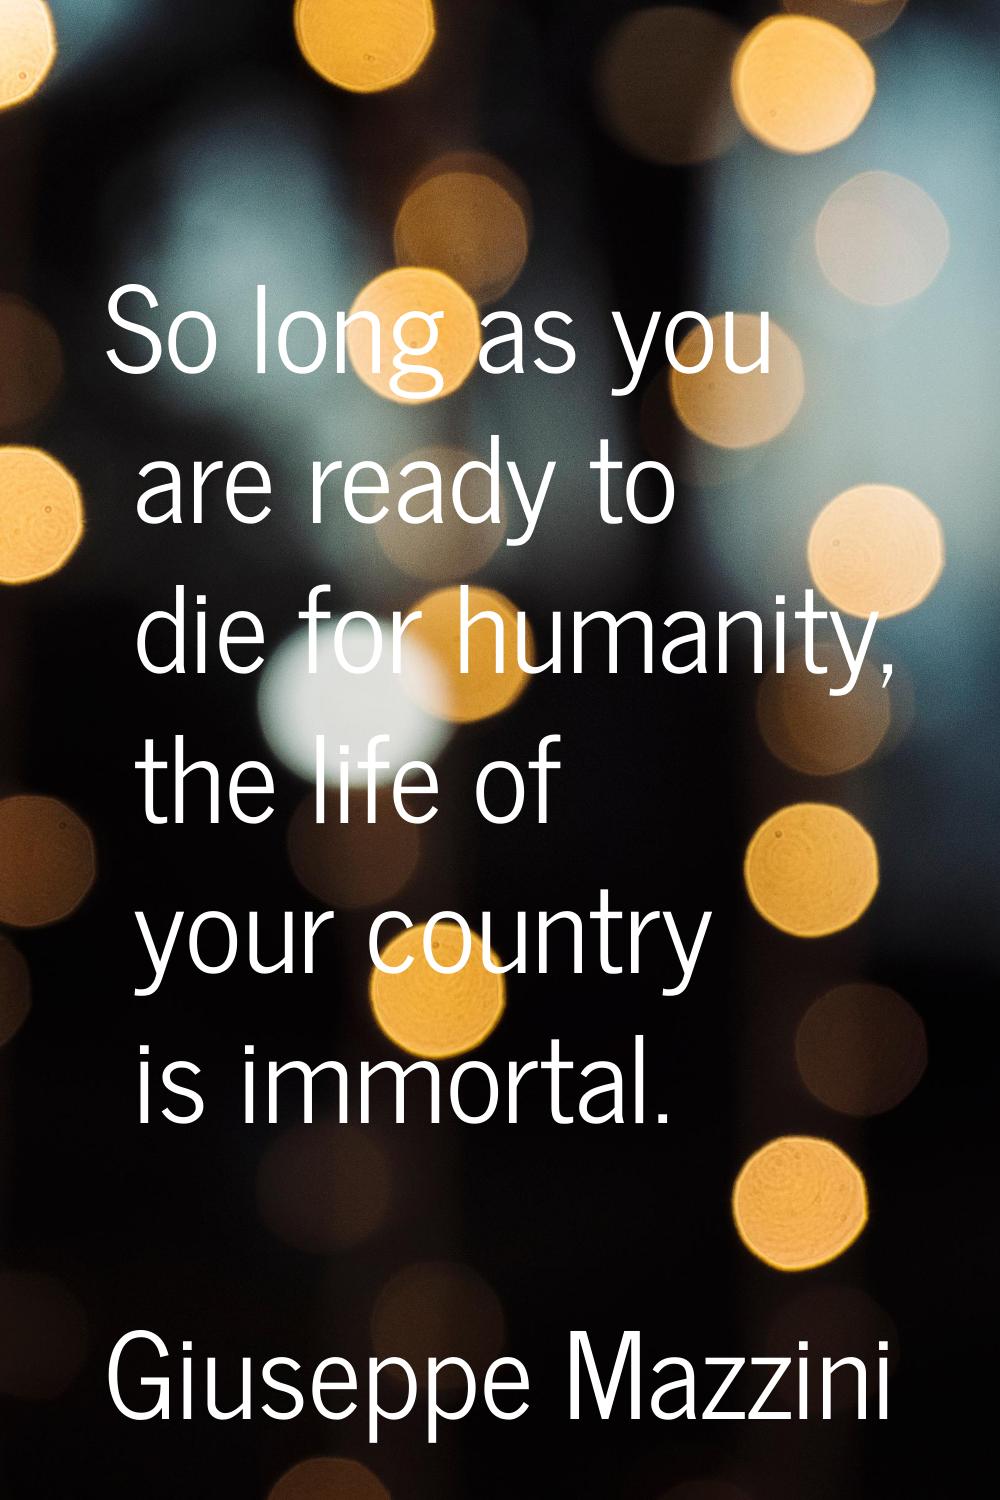 So long as you are ready to die for humanity, the life of your country is immortal.